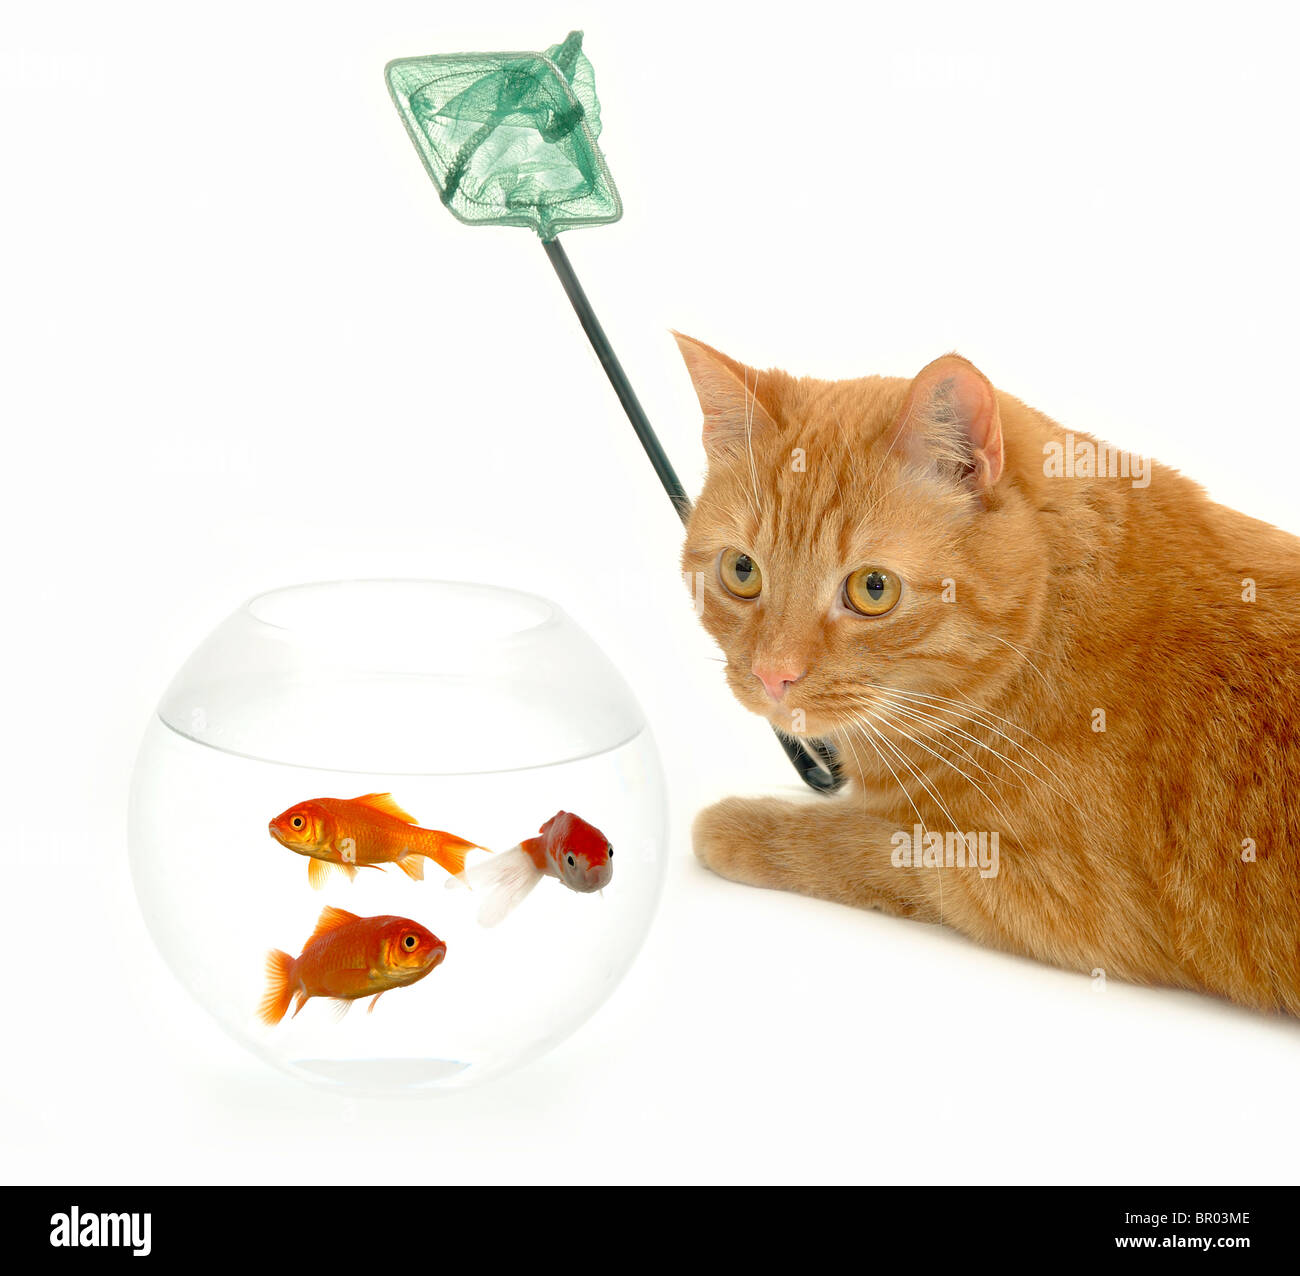 Cat is holding a net, ready to catch fish. Isolated on a white background  Stock Photo - Alamy